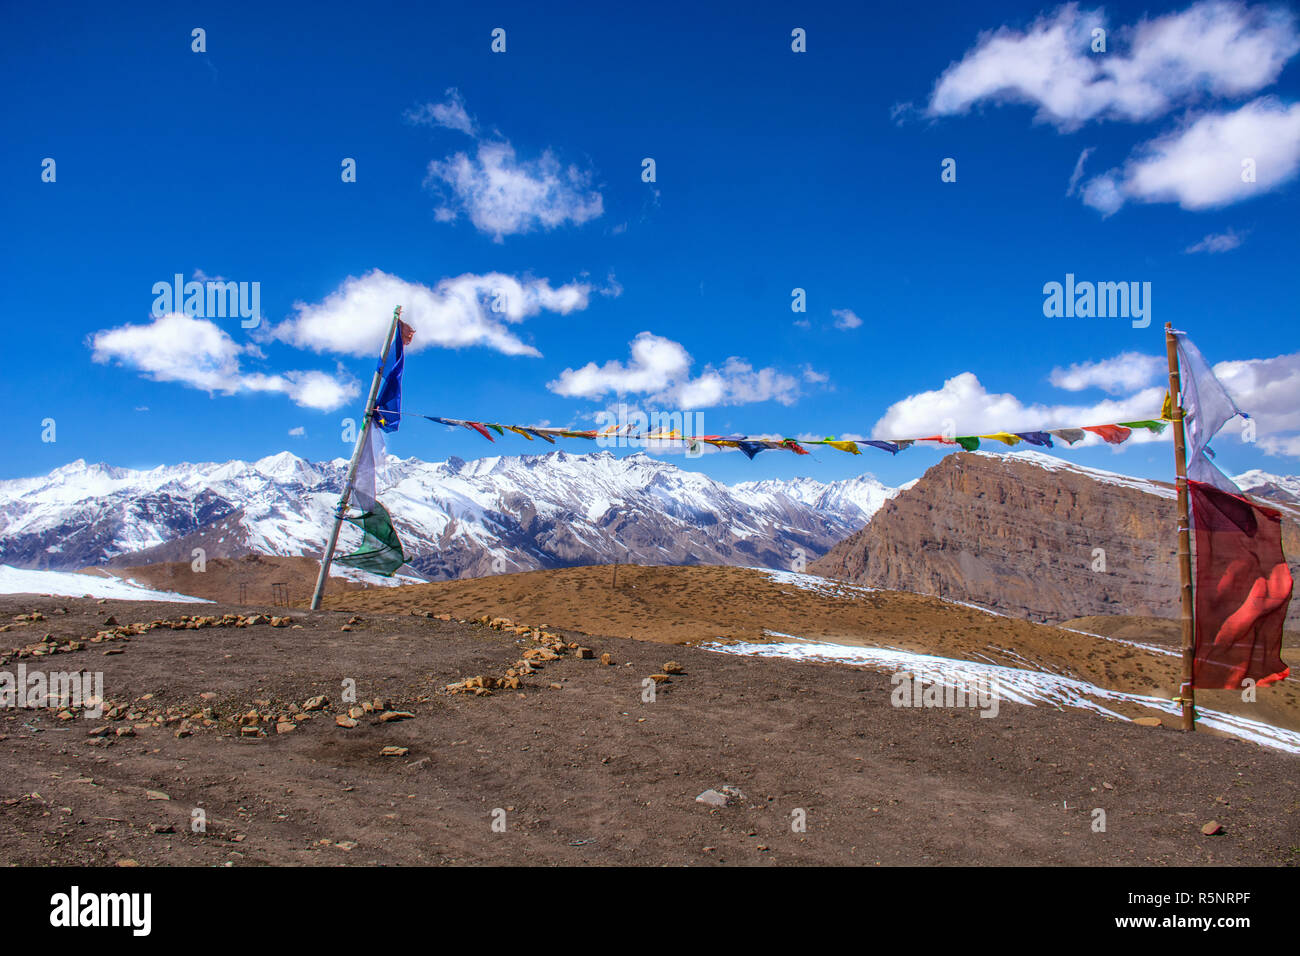 The Mighty Himalayas Stock Photo